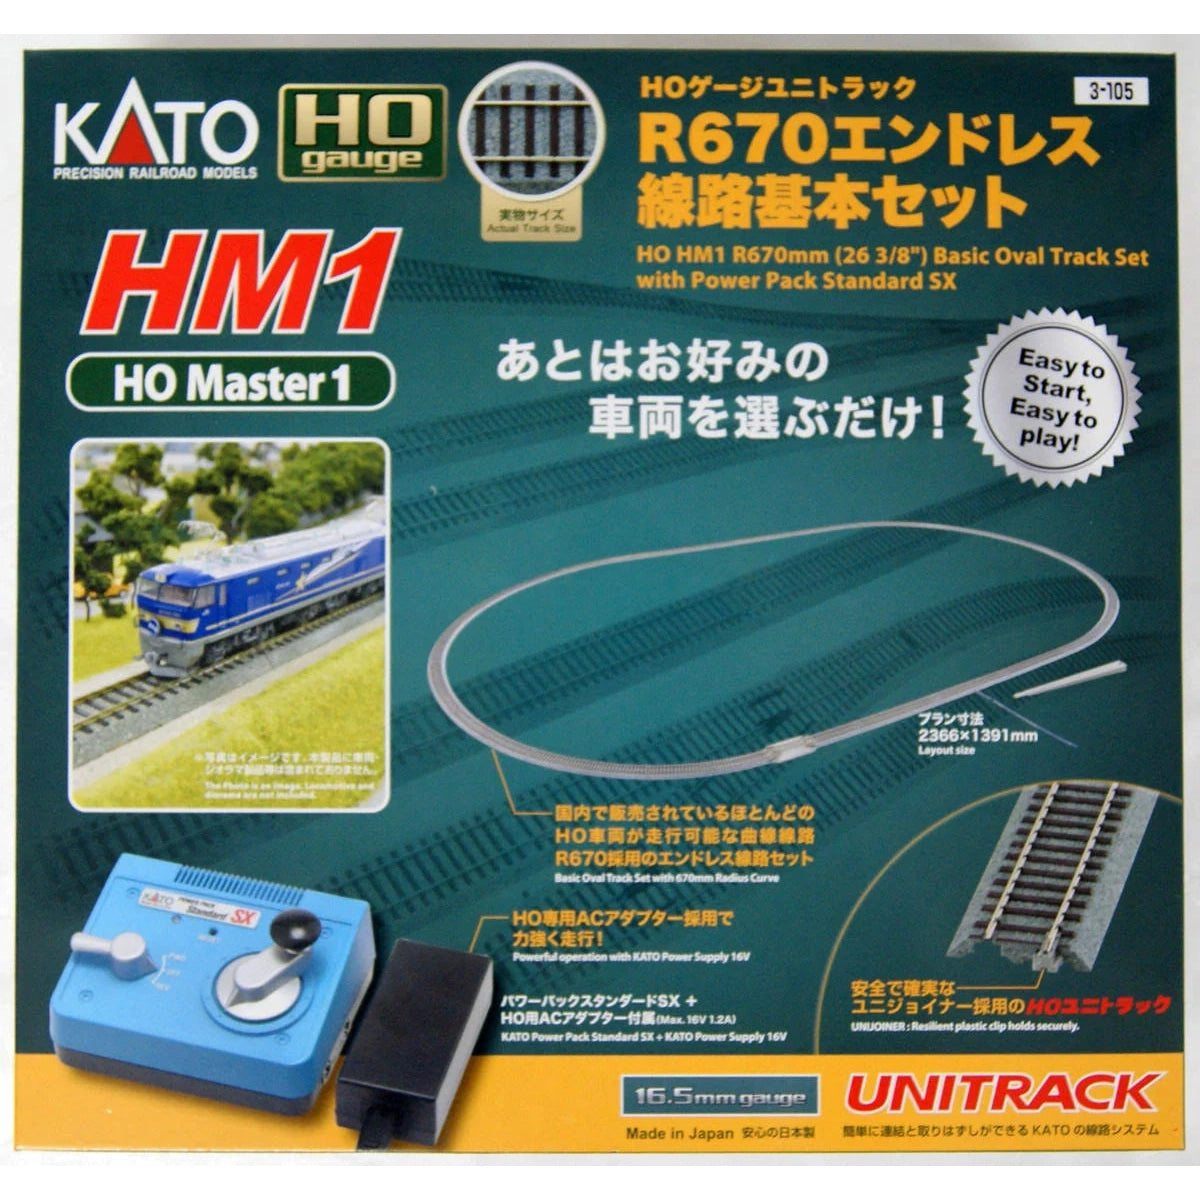 Kato 3-105  HO HM1 R670mm Basic Track Oval With Power Pack SX